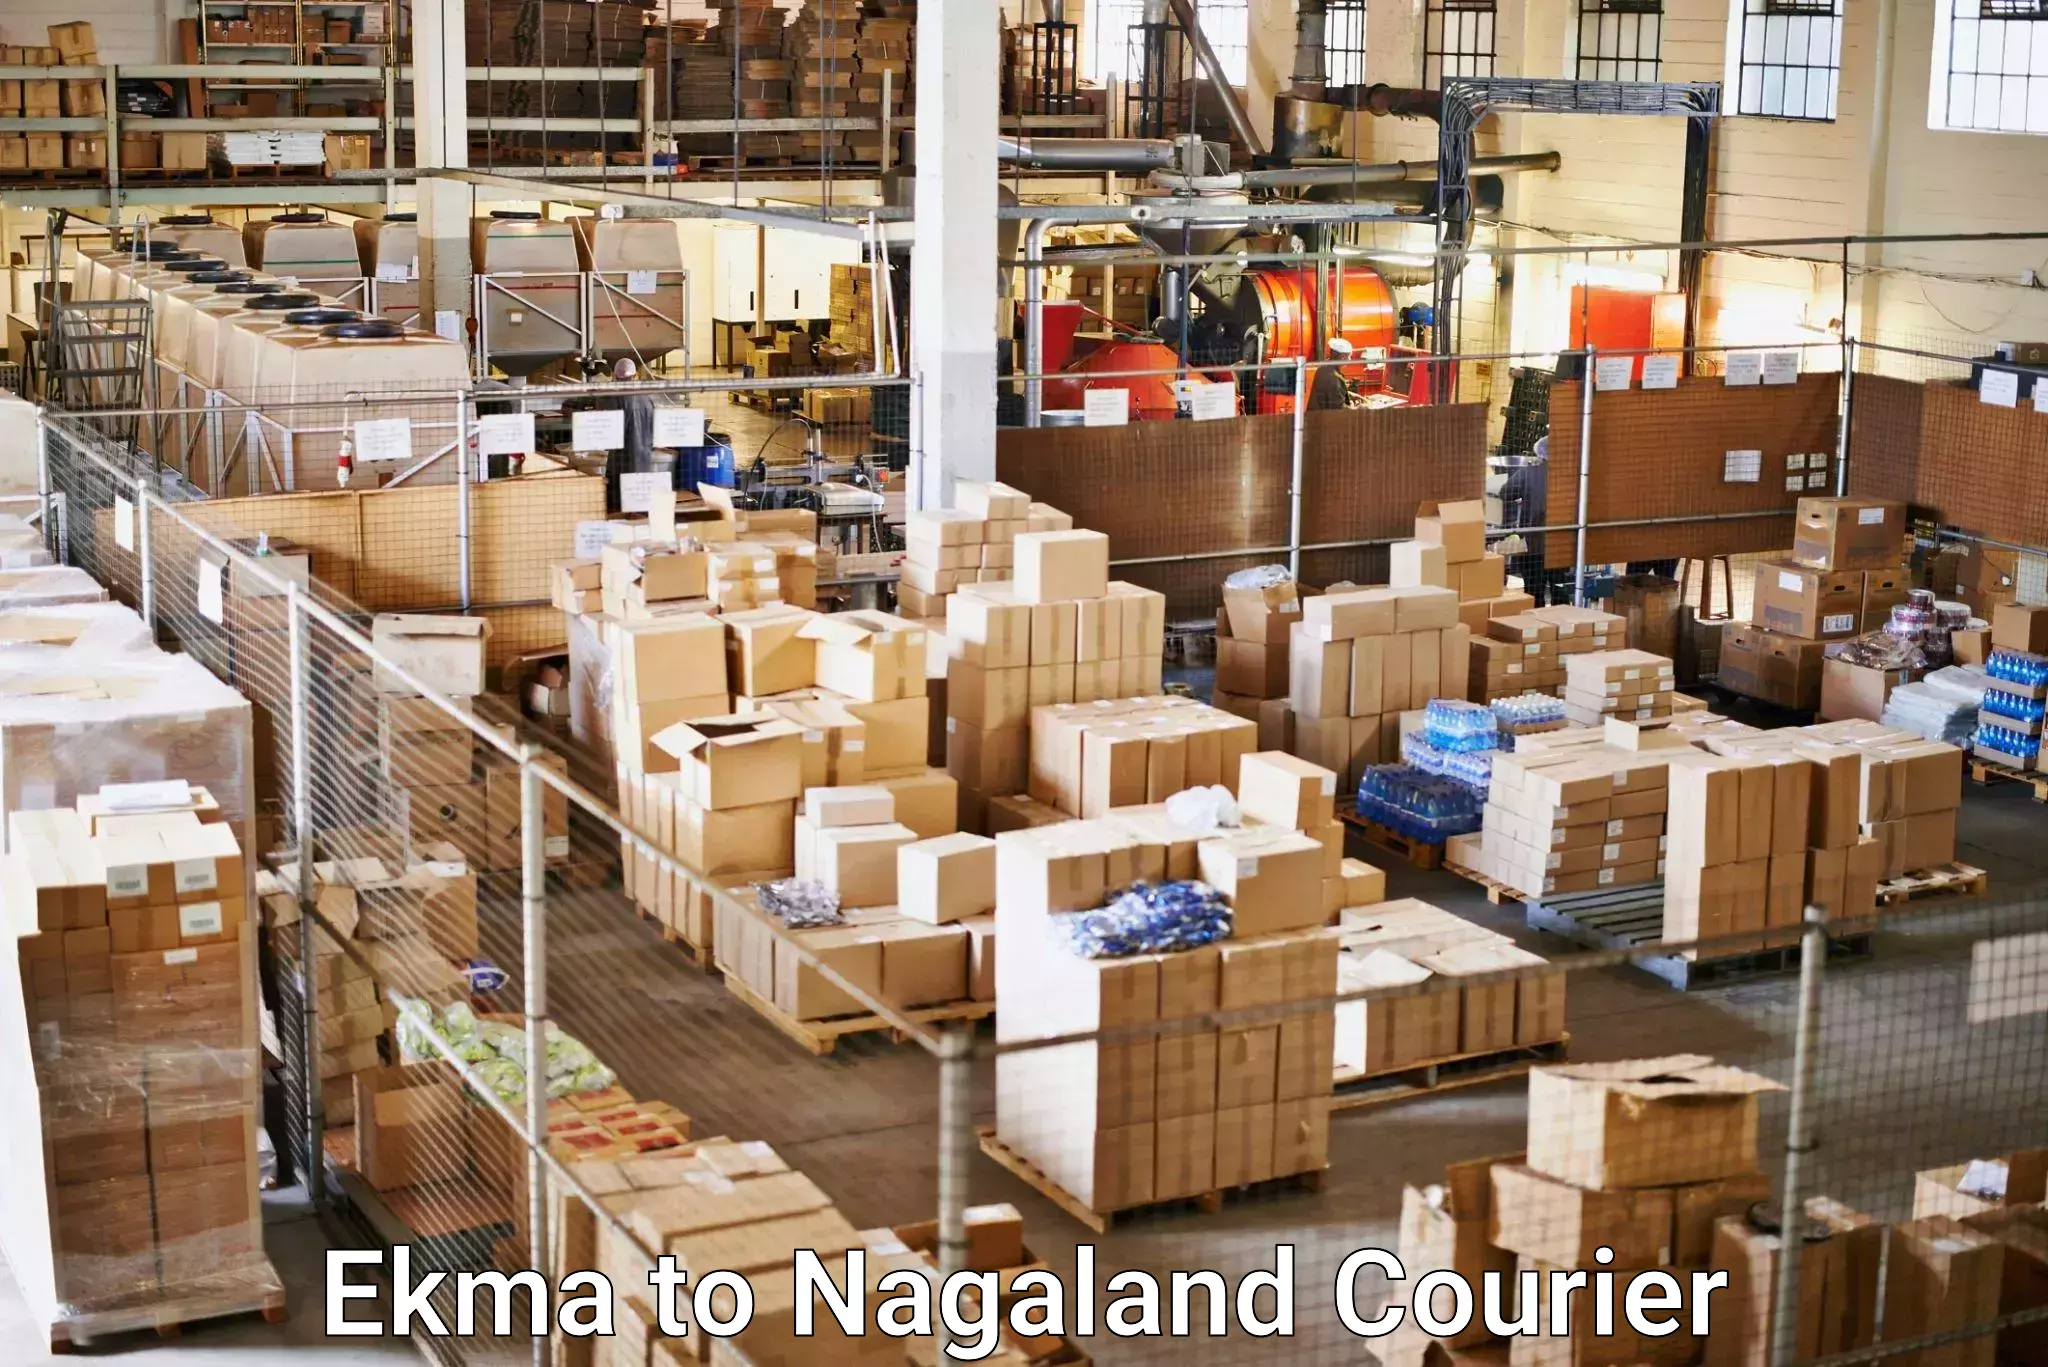 State-of-the-art courier technology Ekma to Nagaland